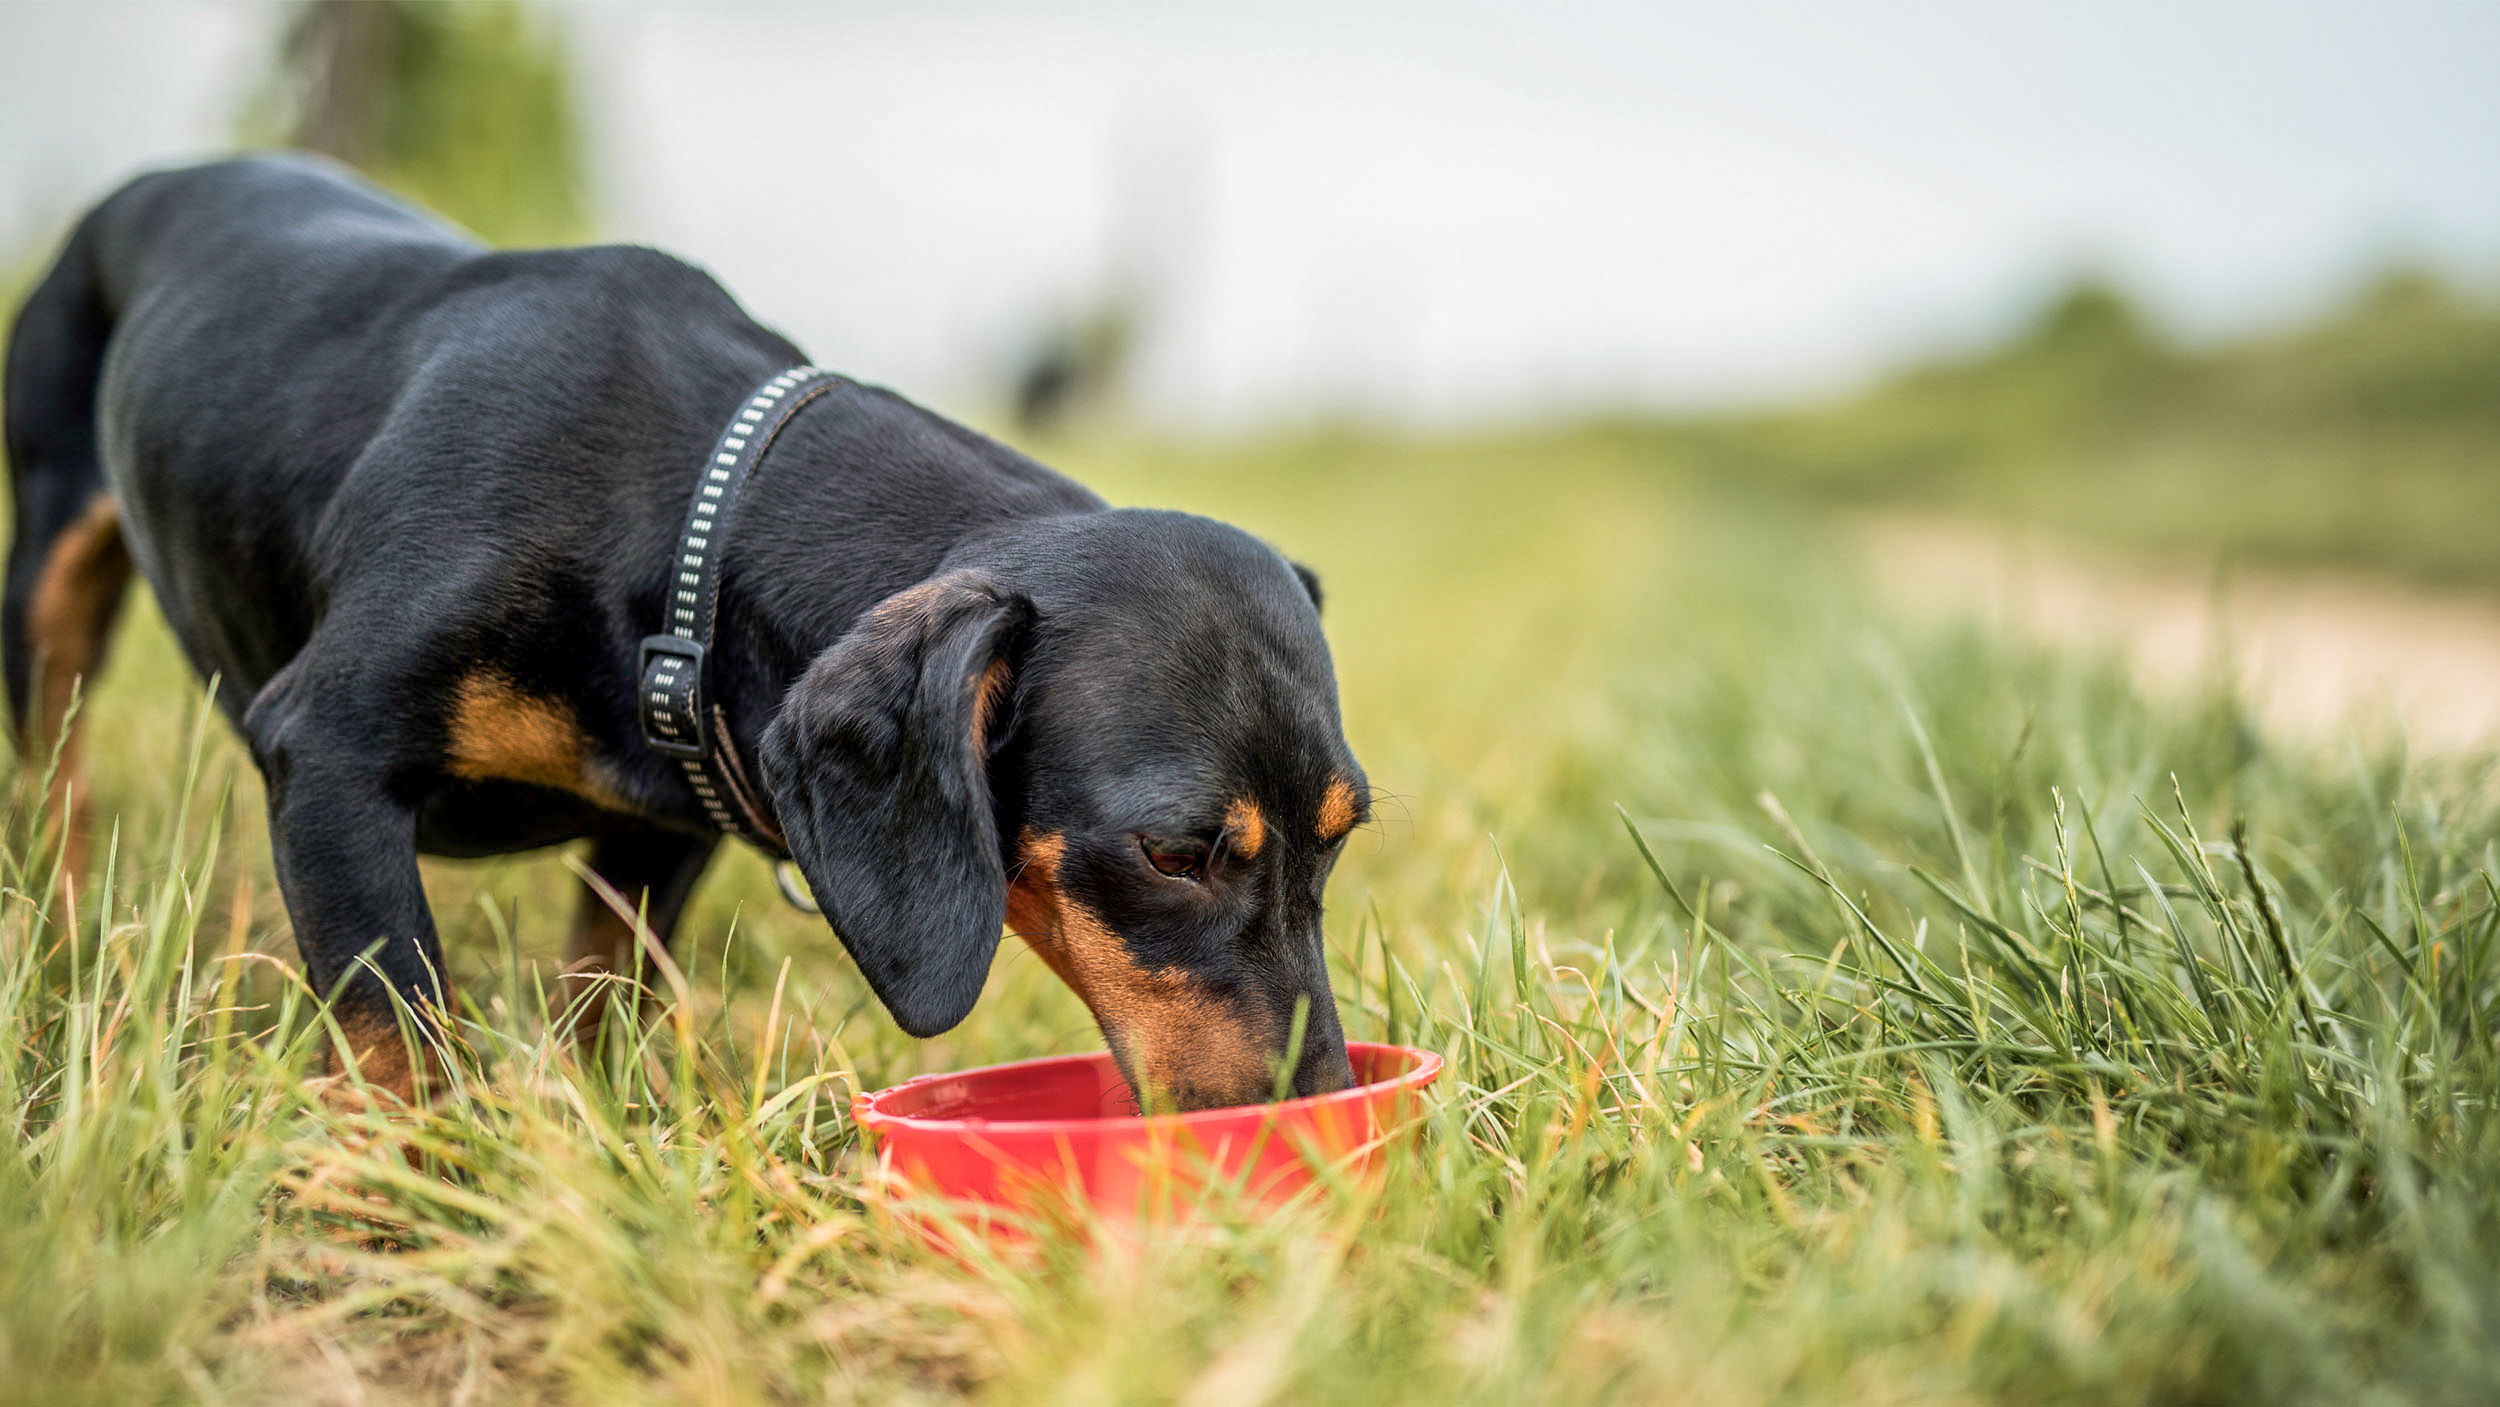 Adult dog standing outside eating from a red bowl.